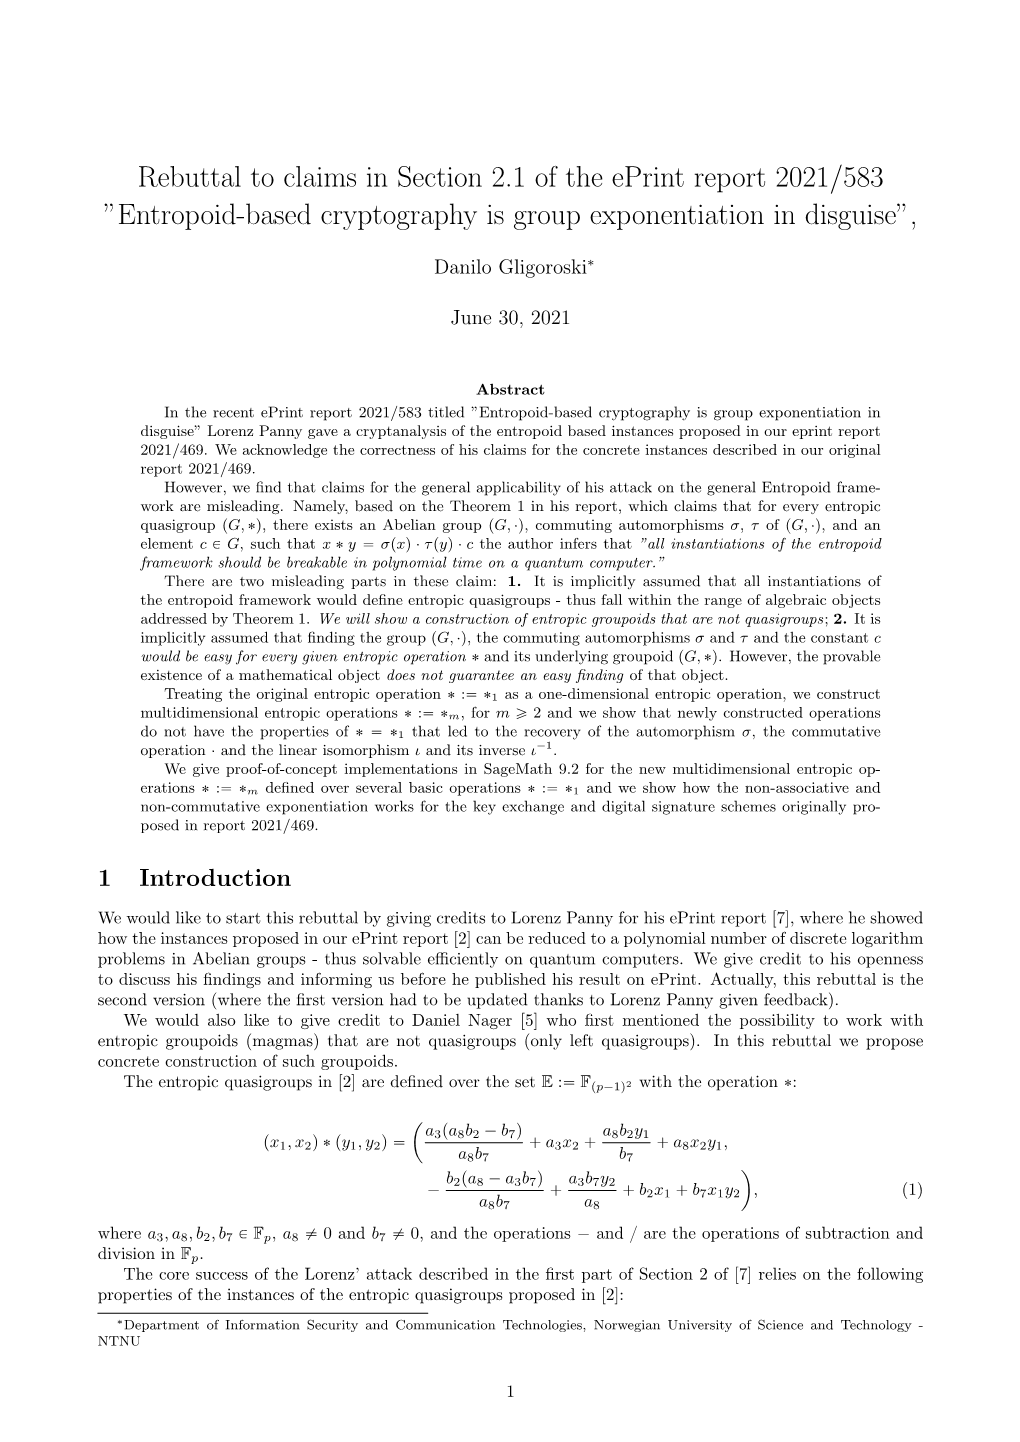 Rebuttal to Claims in Section 2.1 of the Eprint Report 2021/583 ”Entropoid-Based Cryptography Is Group Exponentiation in Disguise”